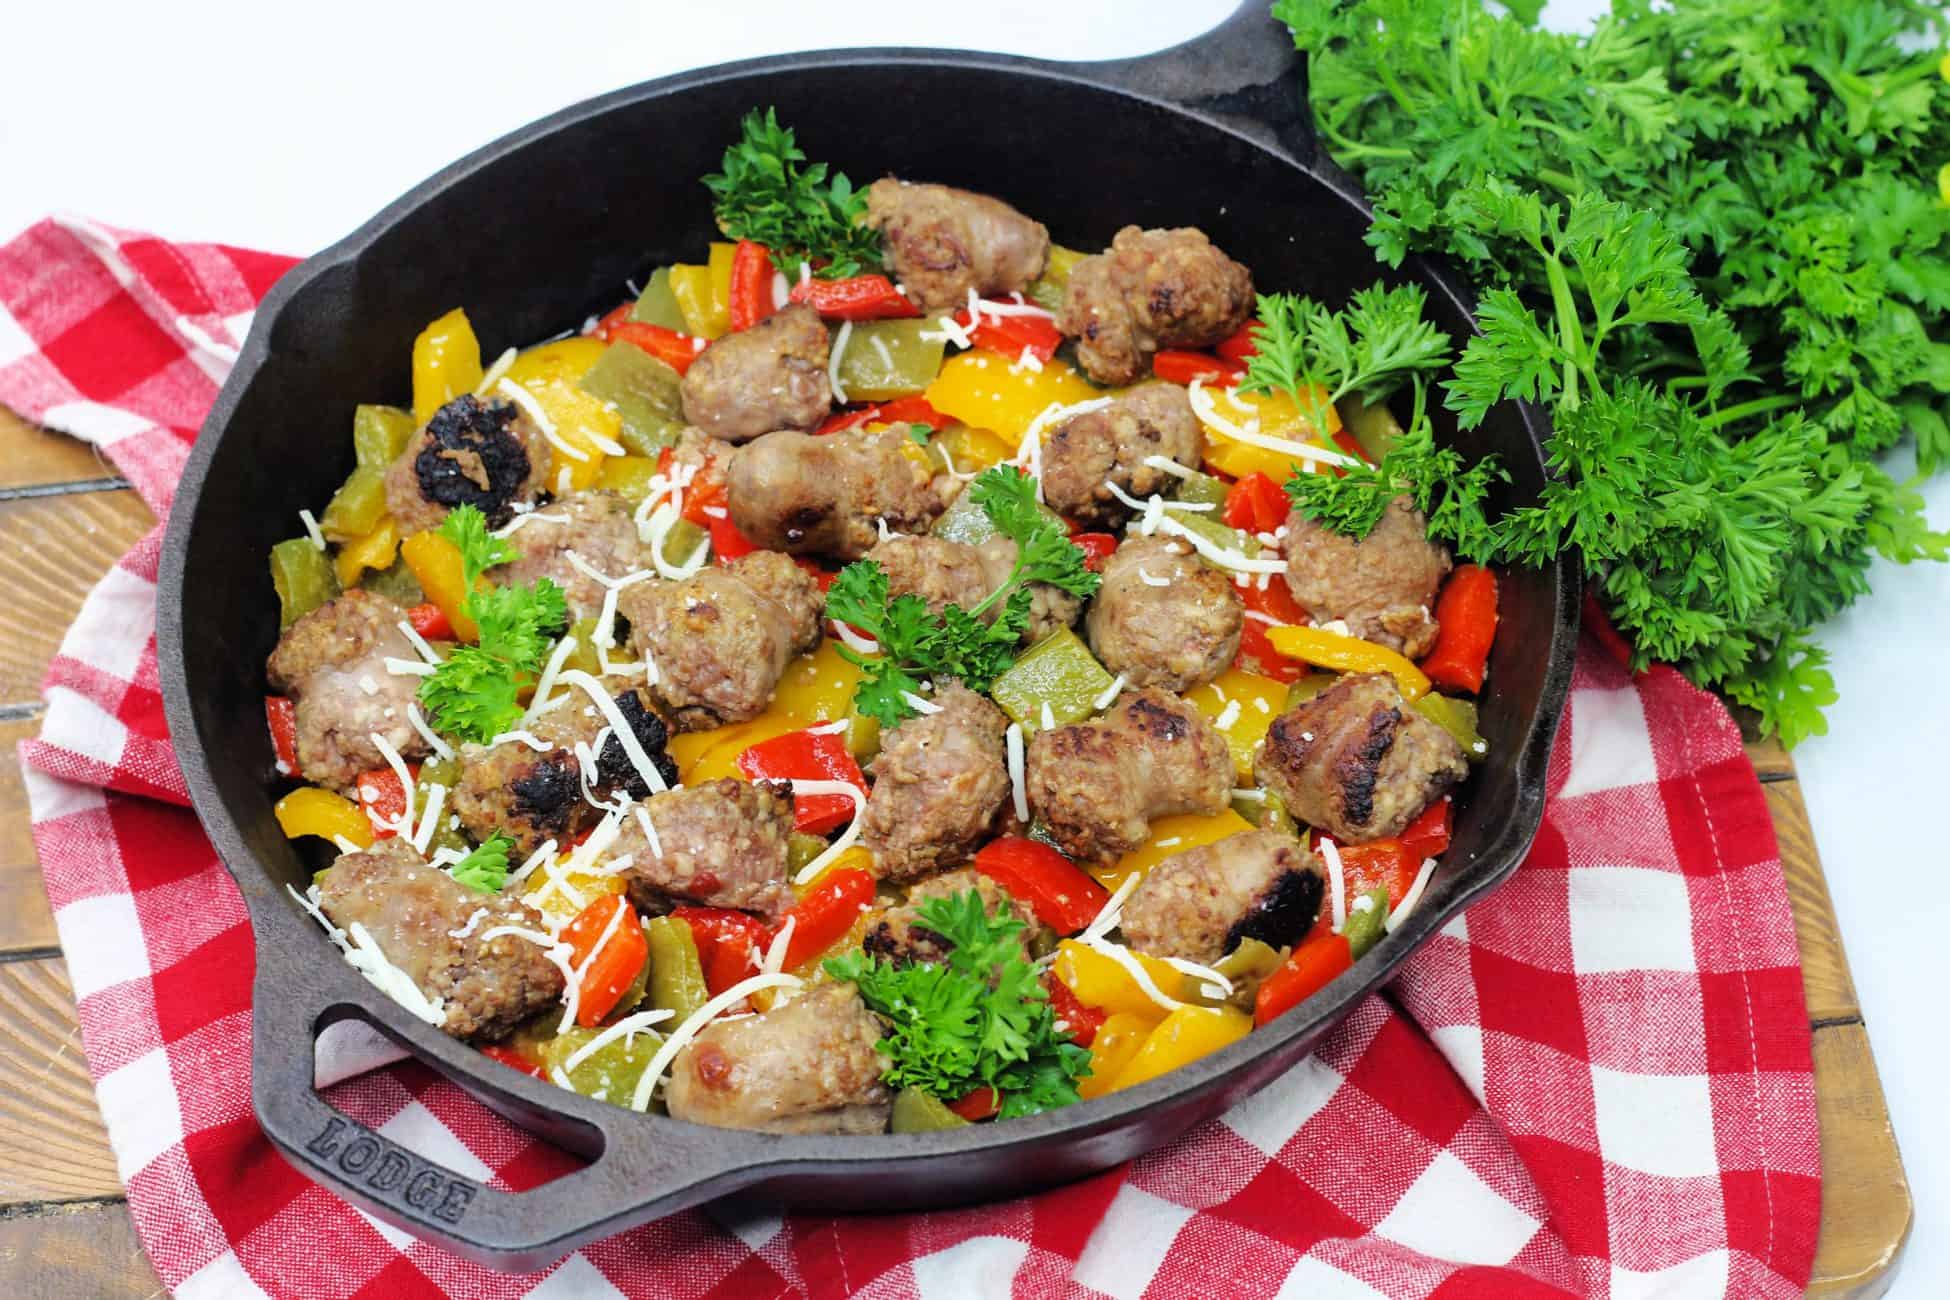 Italian Sausage, Onions and Peppers Skillet